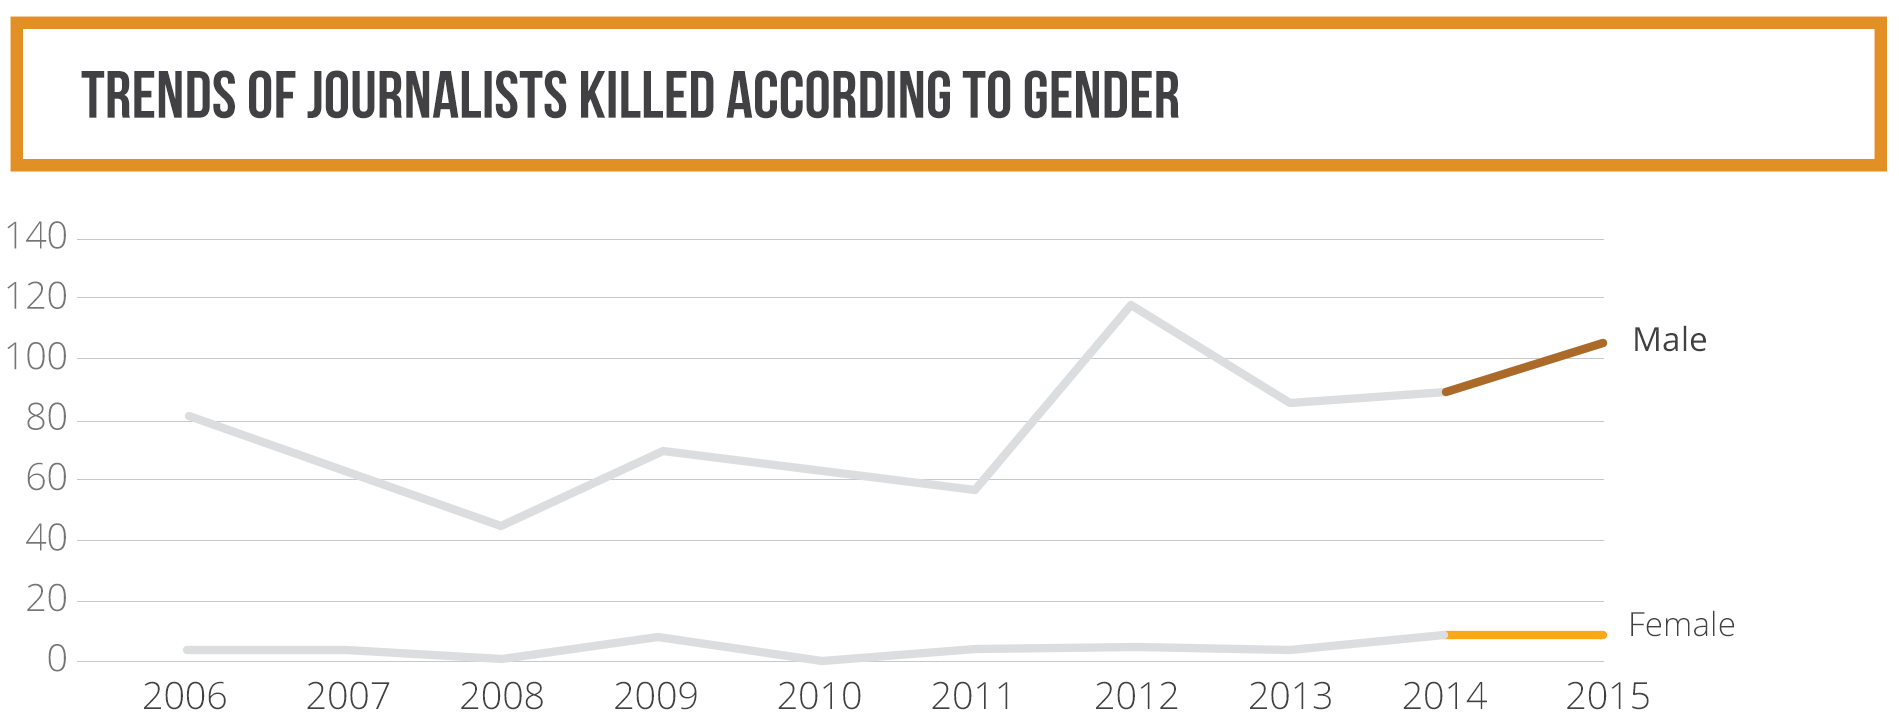 Trends of journalists killed according to gender